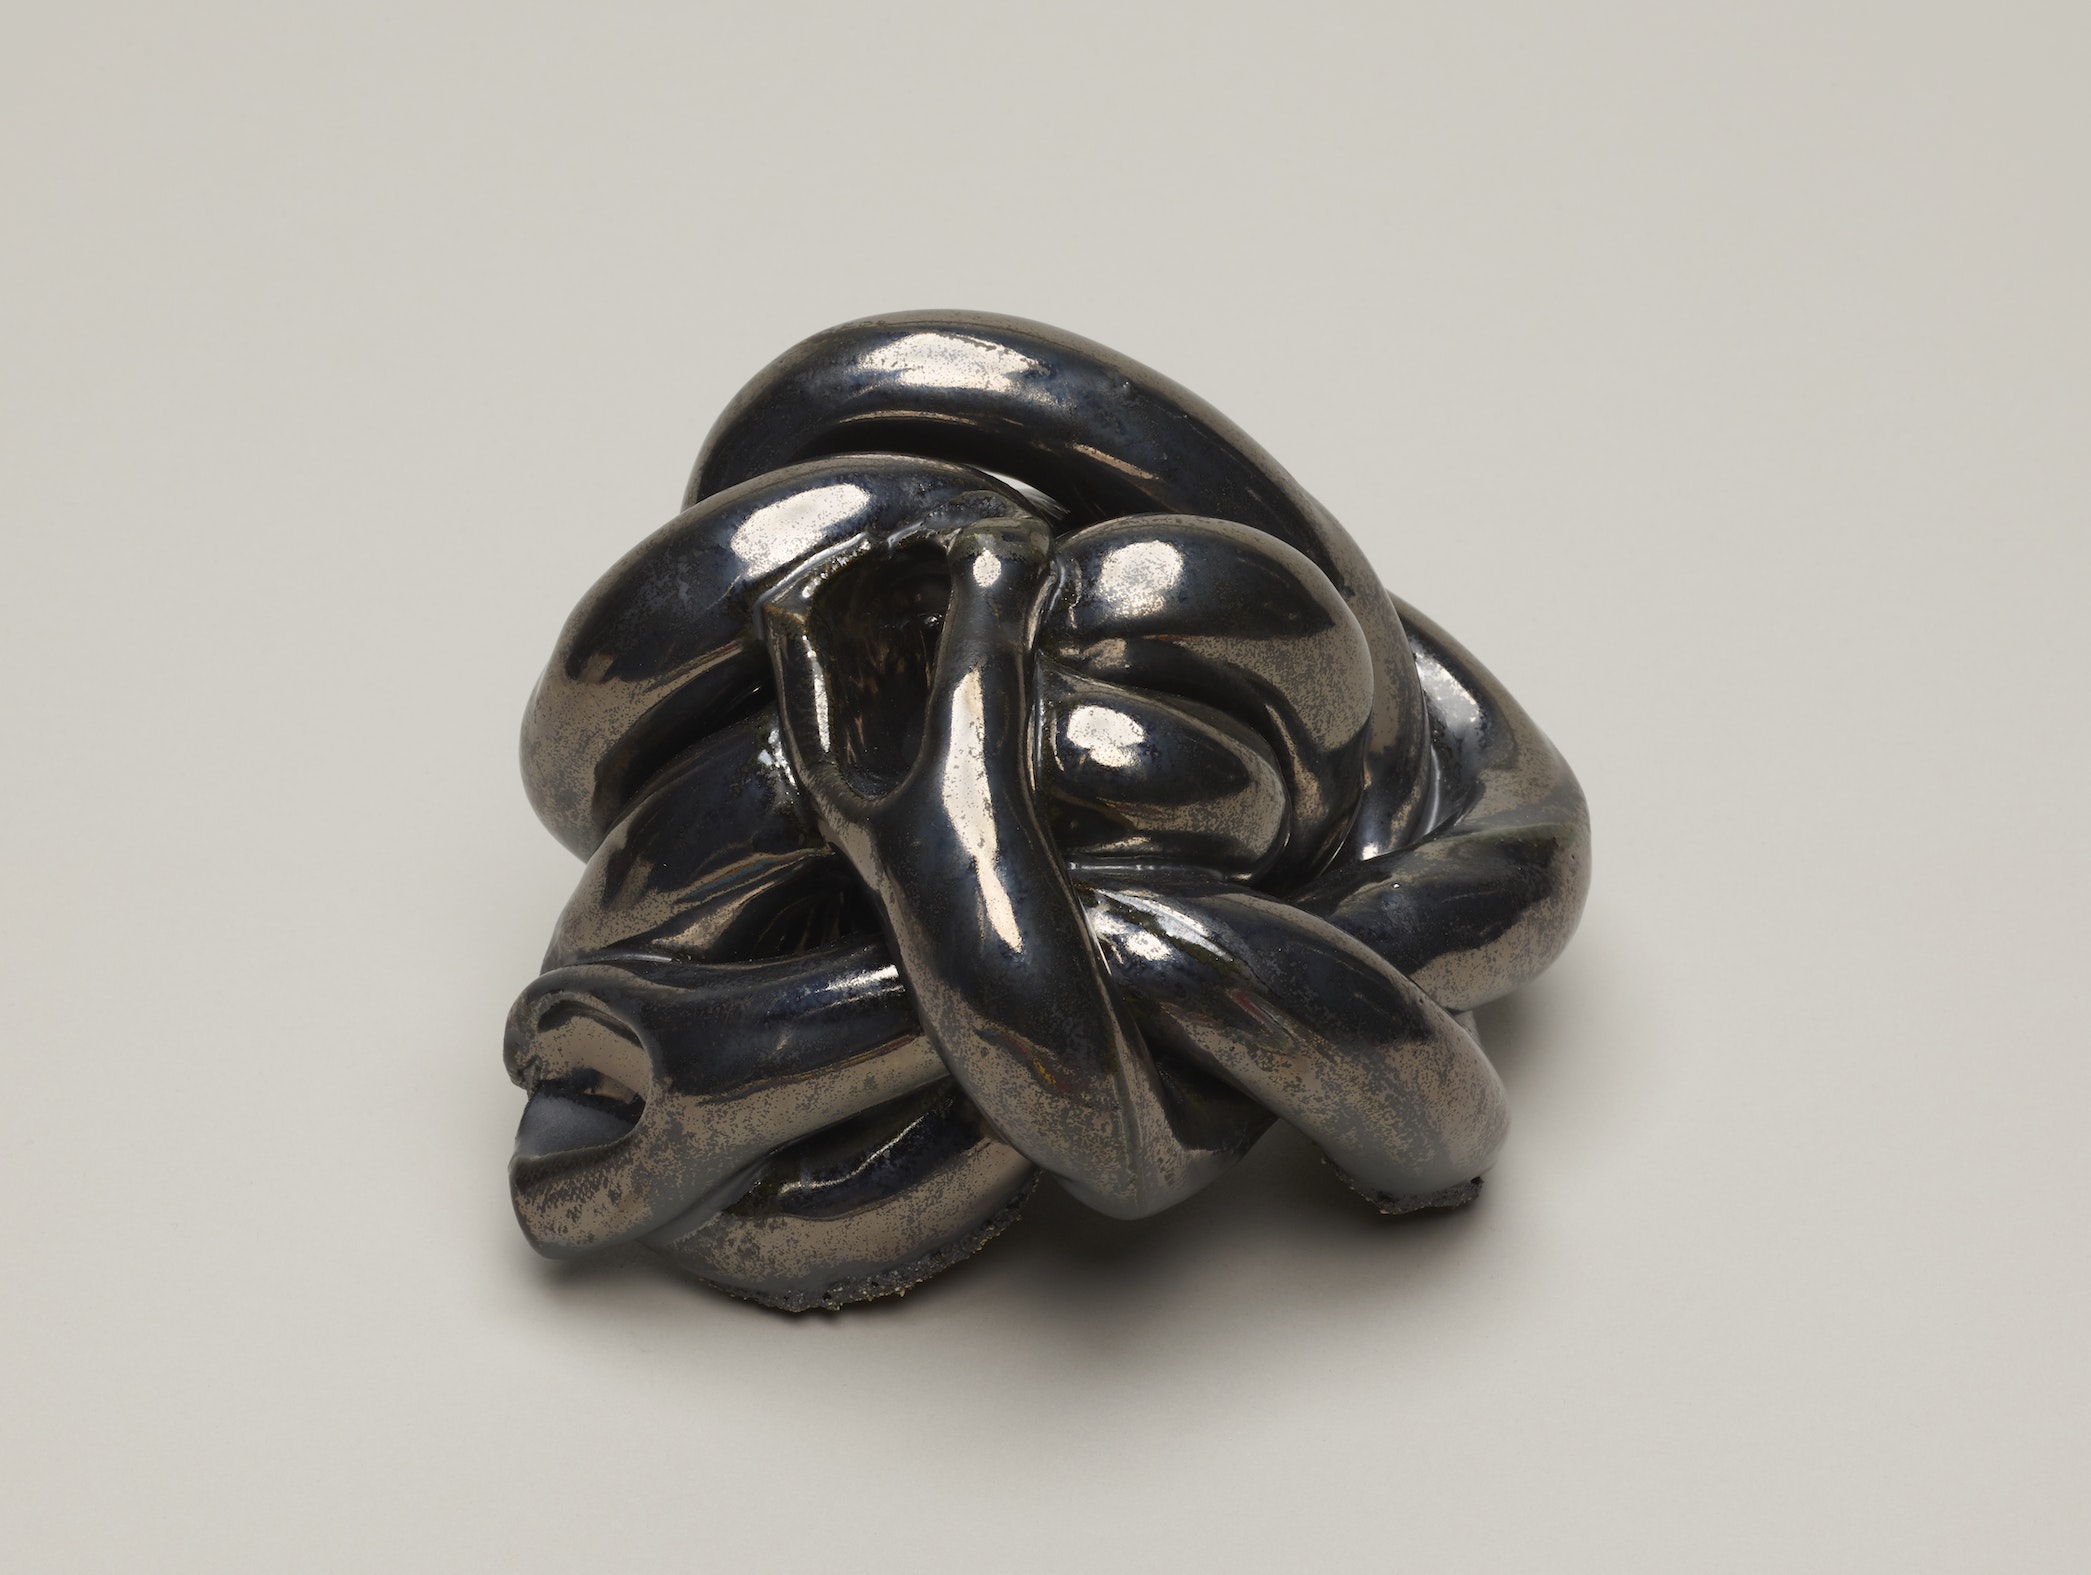 Shiny black clay resembling knotted rope